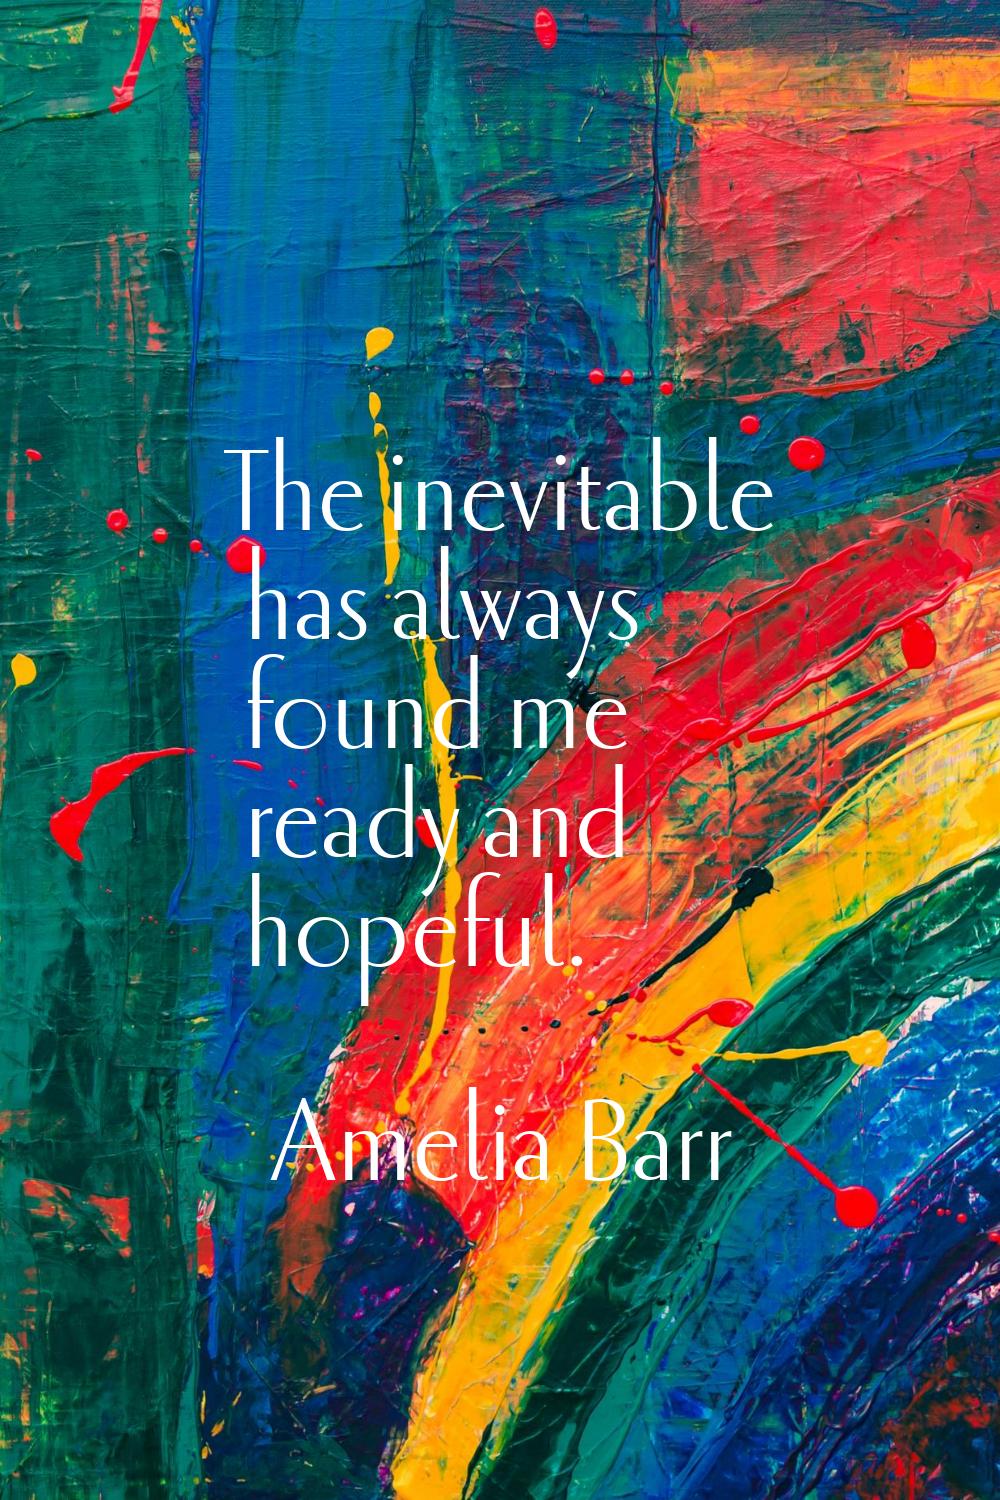 The inevitable has always found me ready and hopeful.